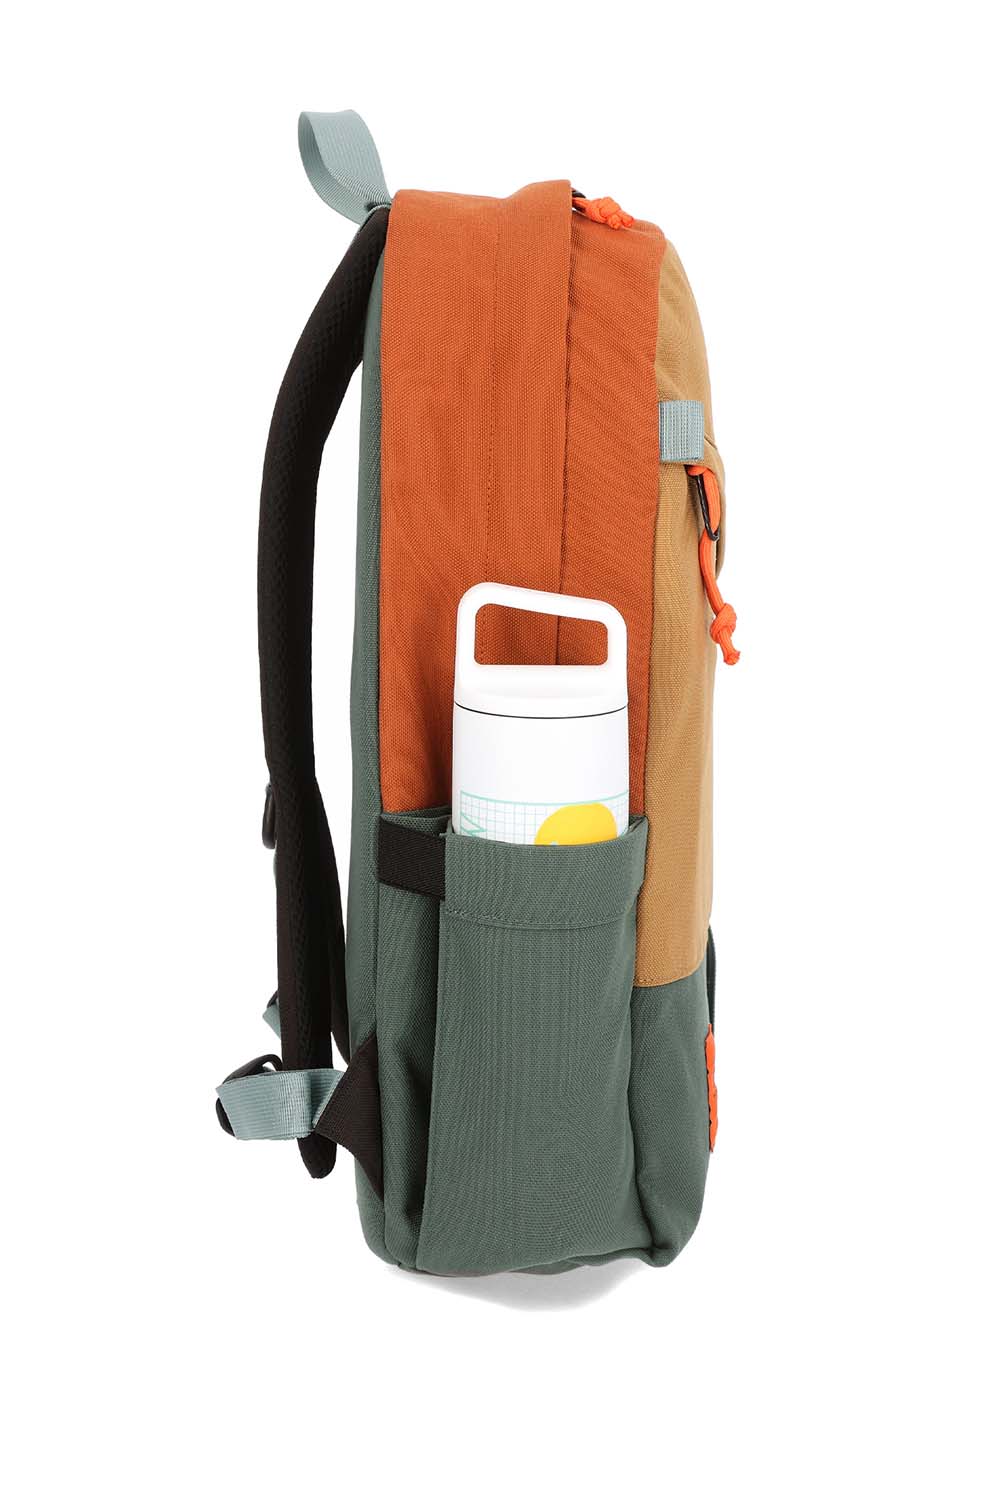 Topo - Daypack Classic - Khaki/Forest/Clay - Side